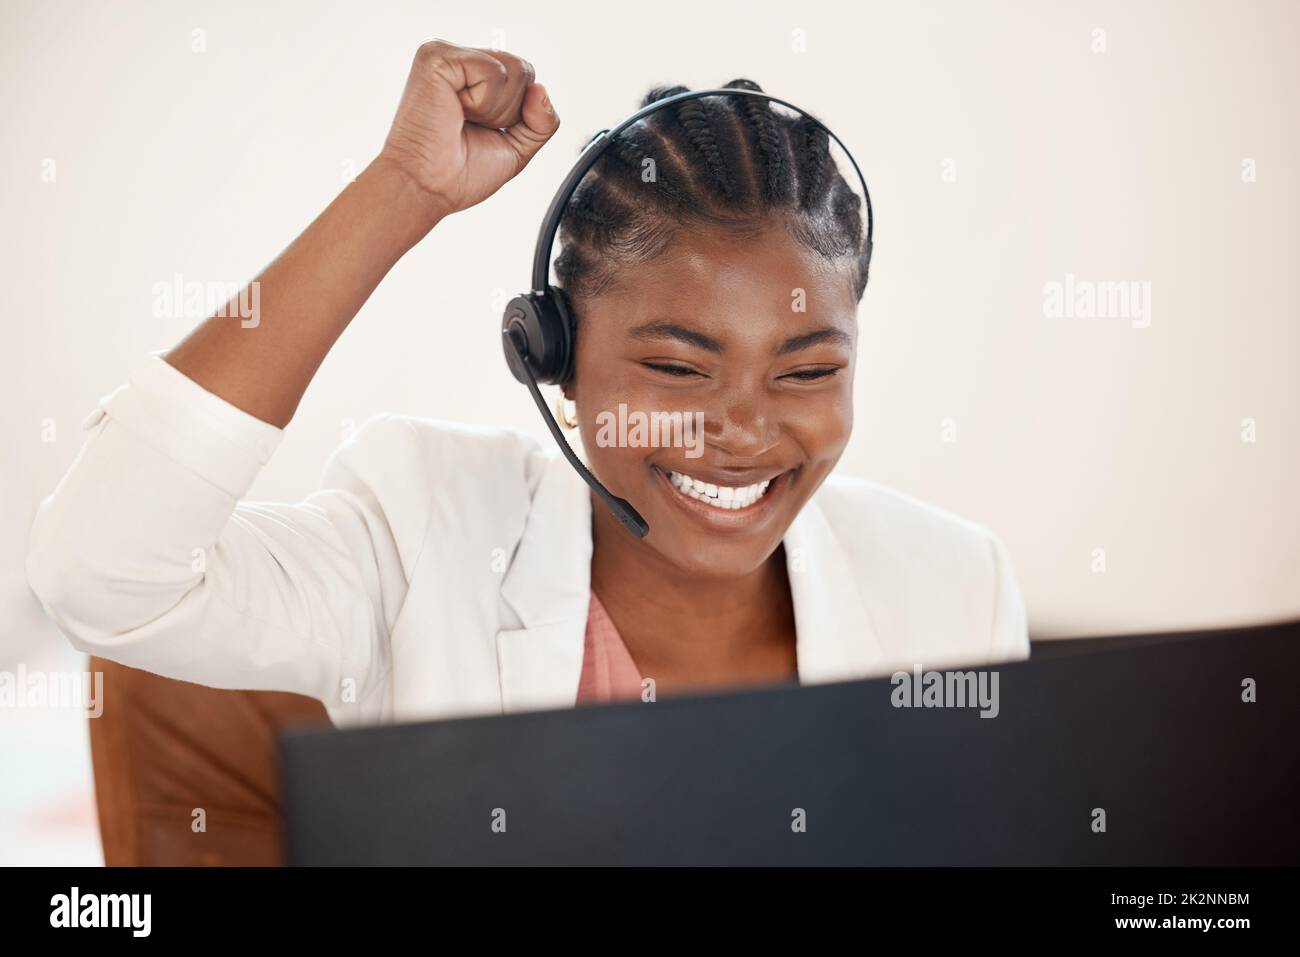 Ill earn extra commission on this one. Shot of a young call centre agent cheering while working on a computer in an office. Stock Photo